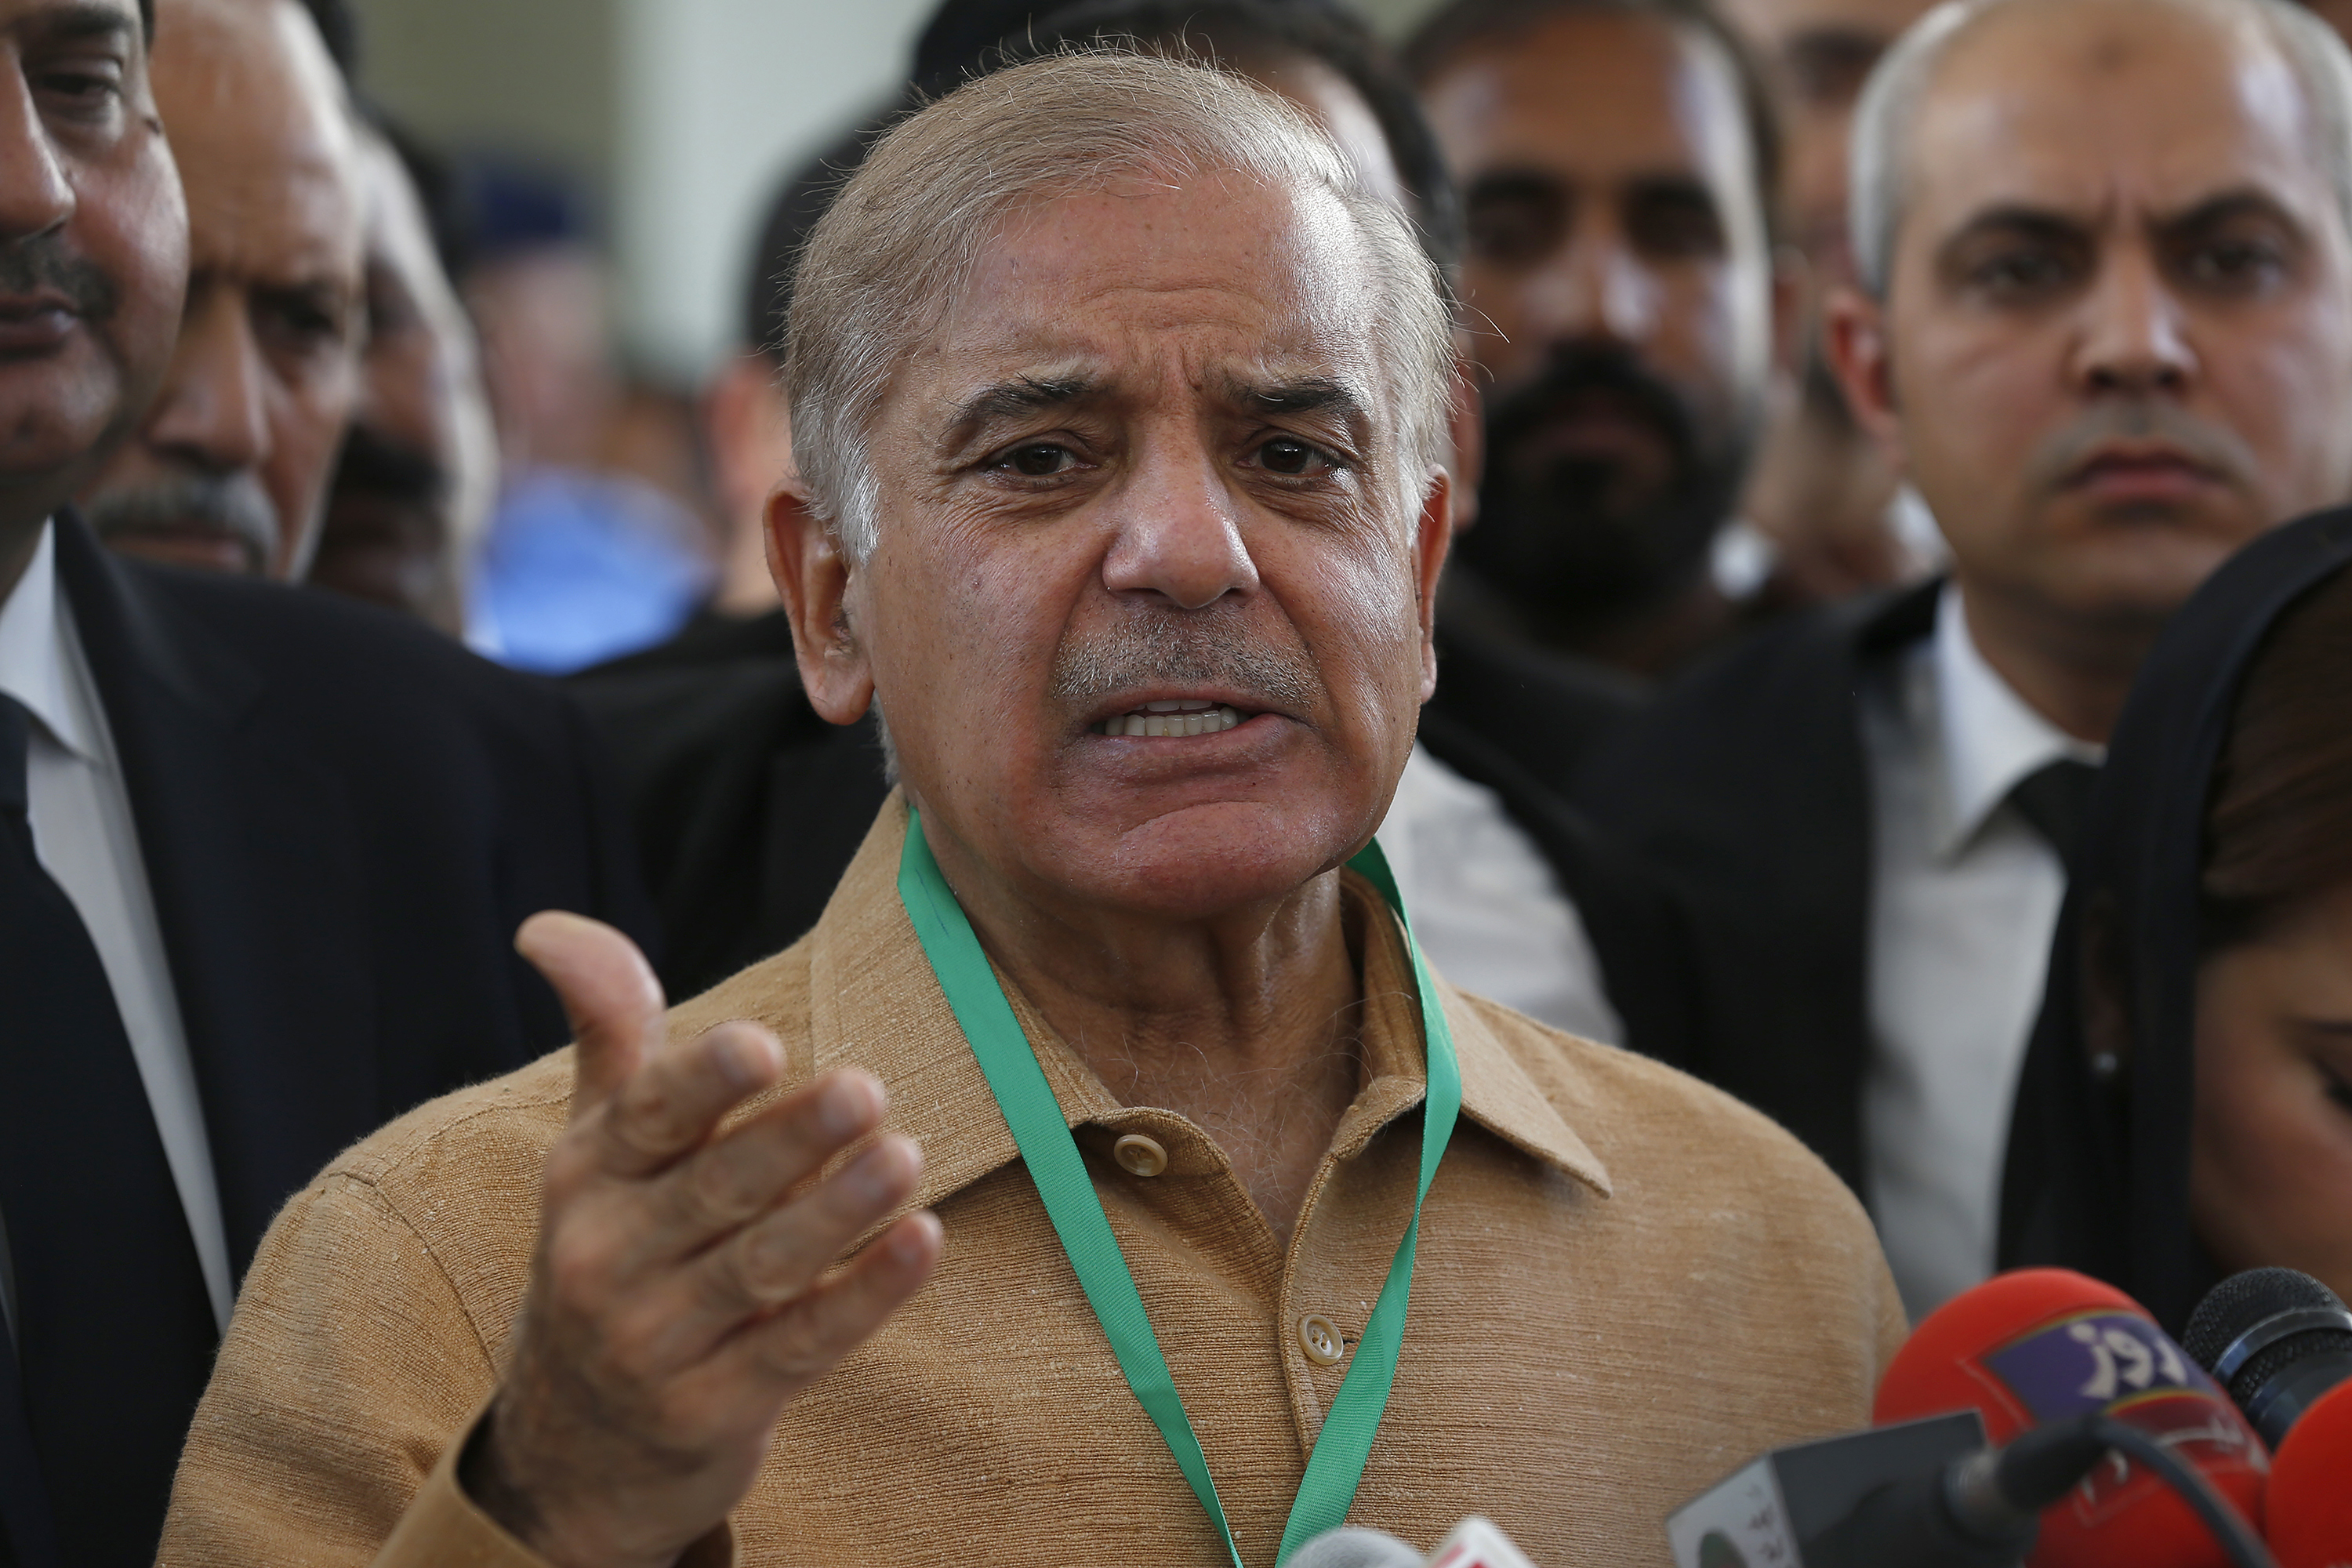 Pakistan’s Prime Minister Shehbaz Sharif extends his condolences in a tweet on Wednesday.